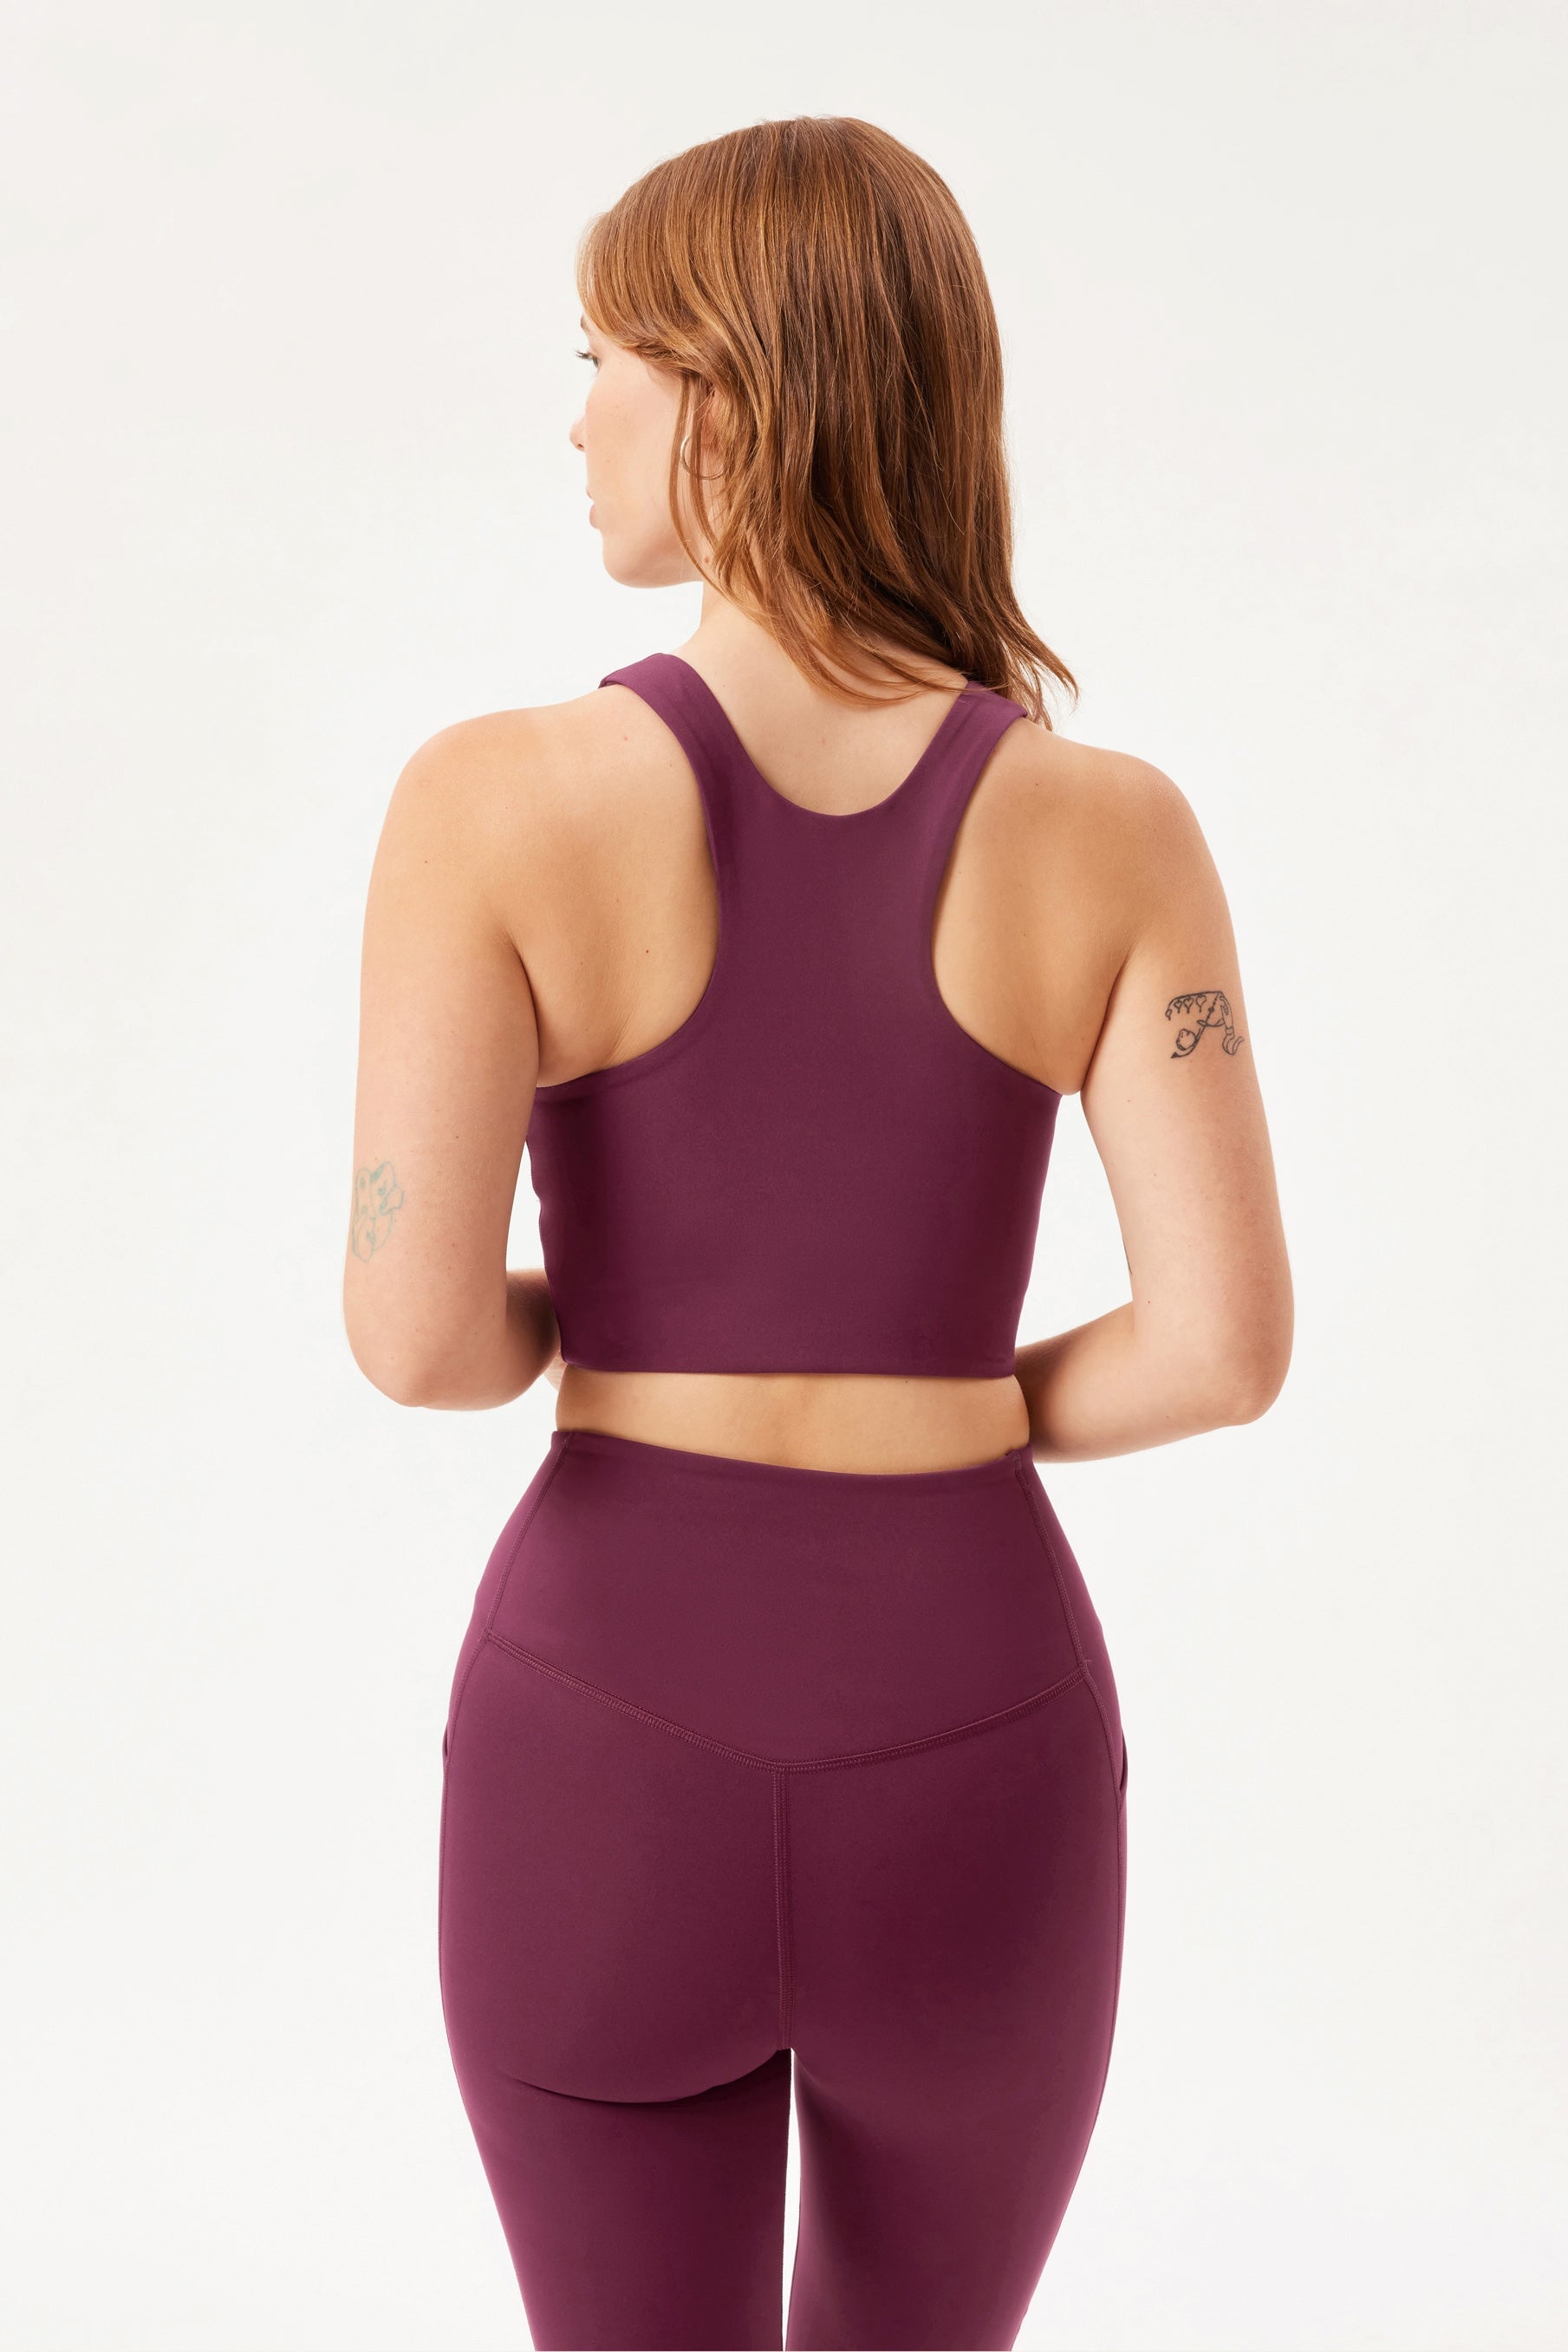 GIRLFRIEND COLLECTIVE Dylan stretch recycled sports bra